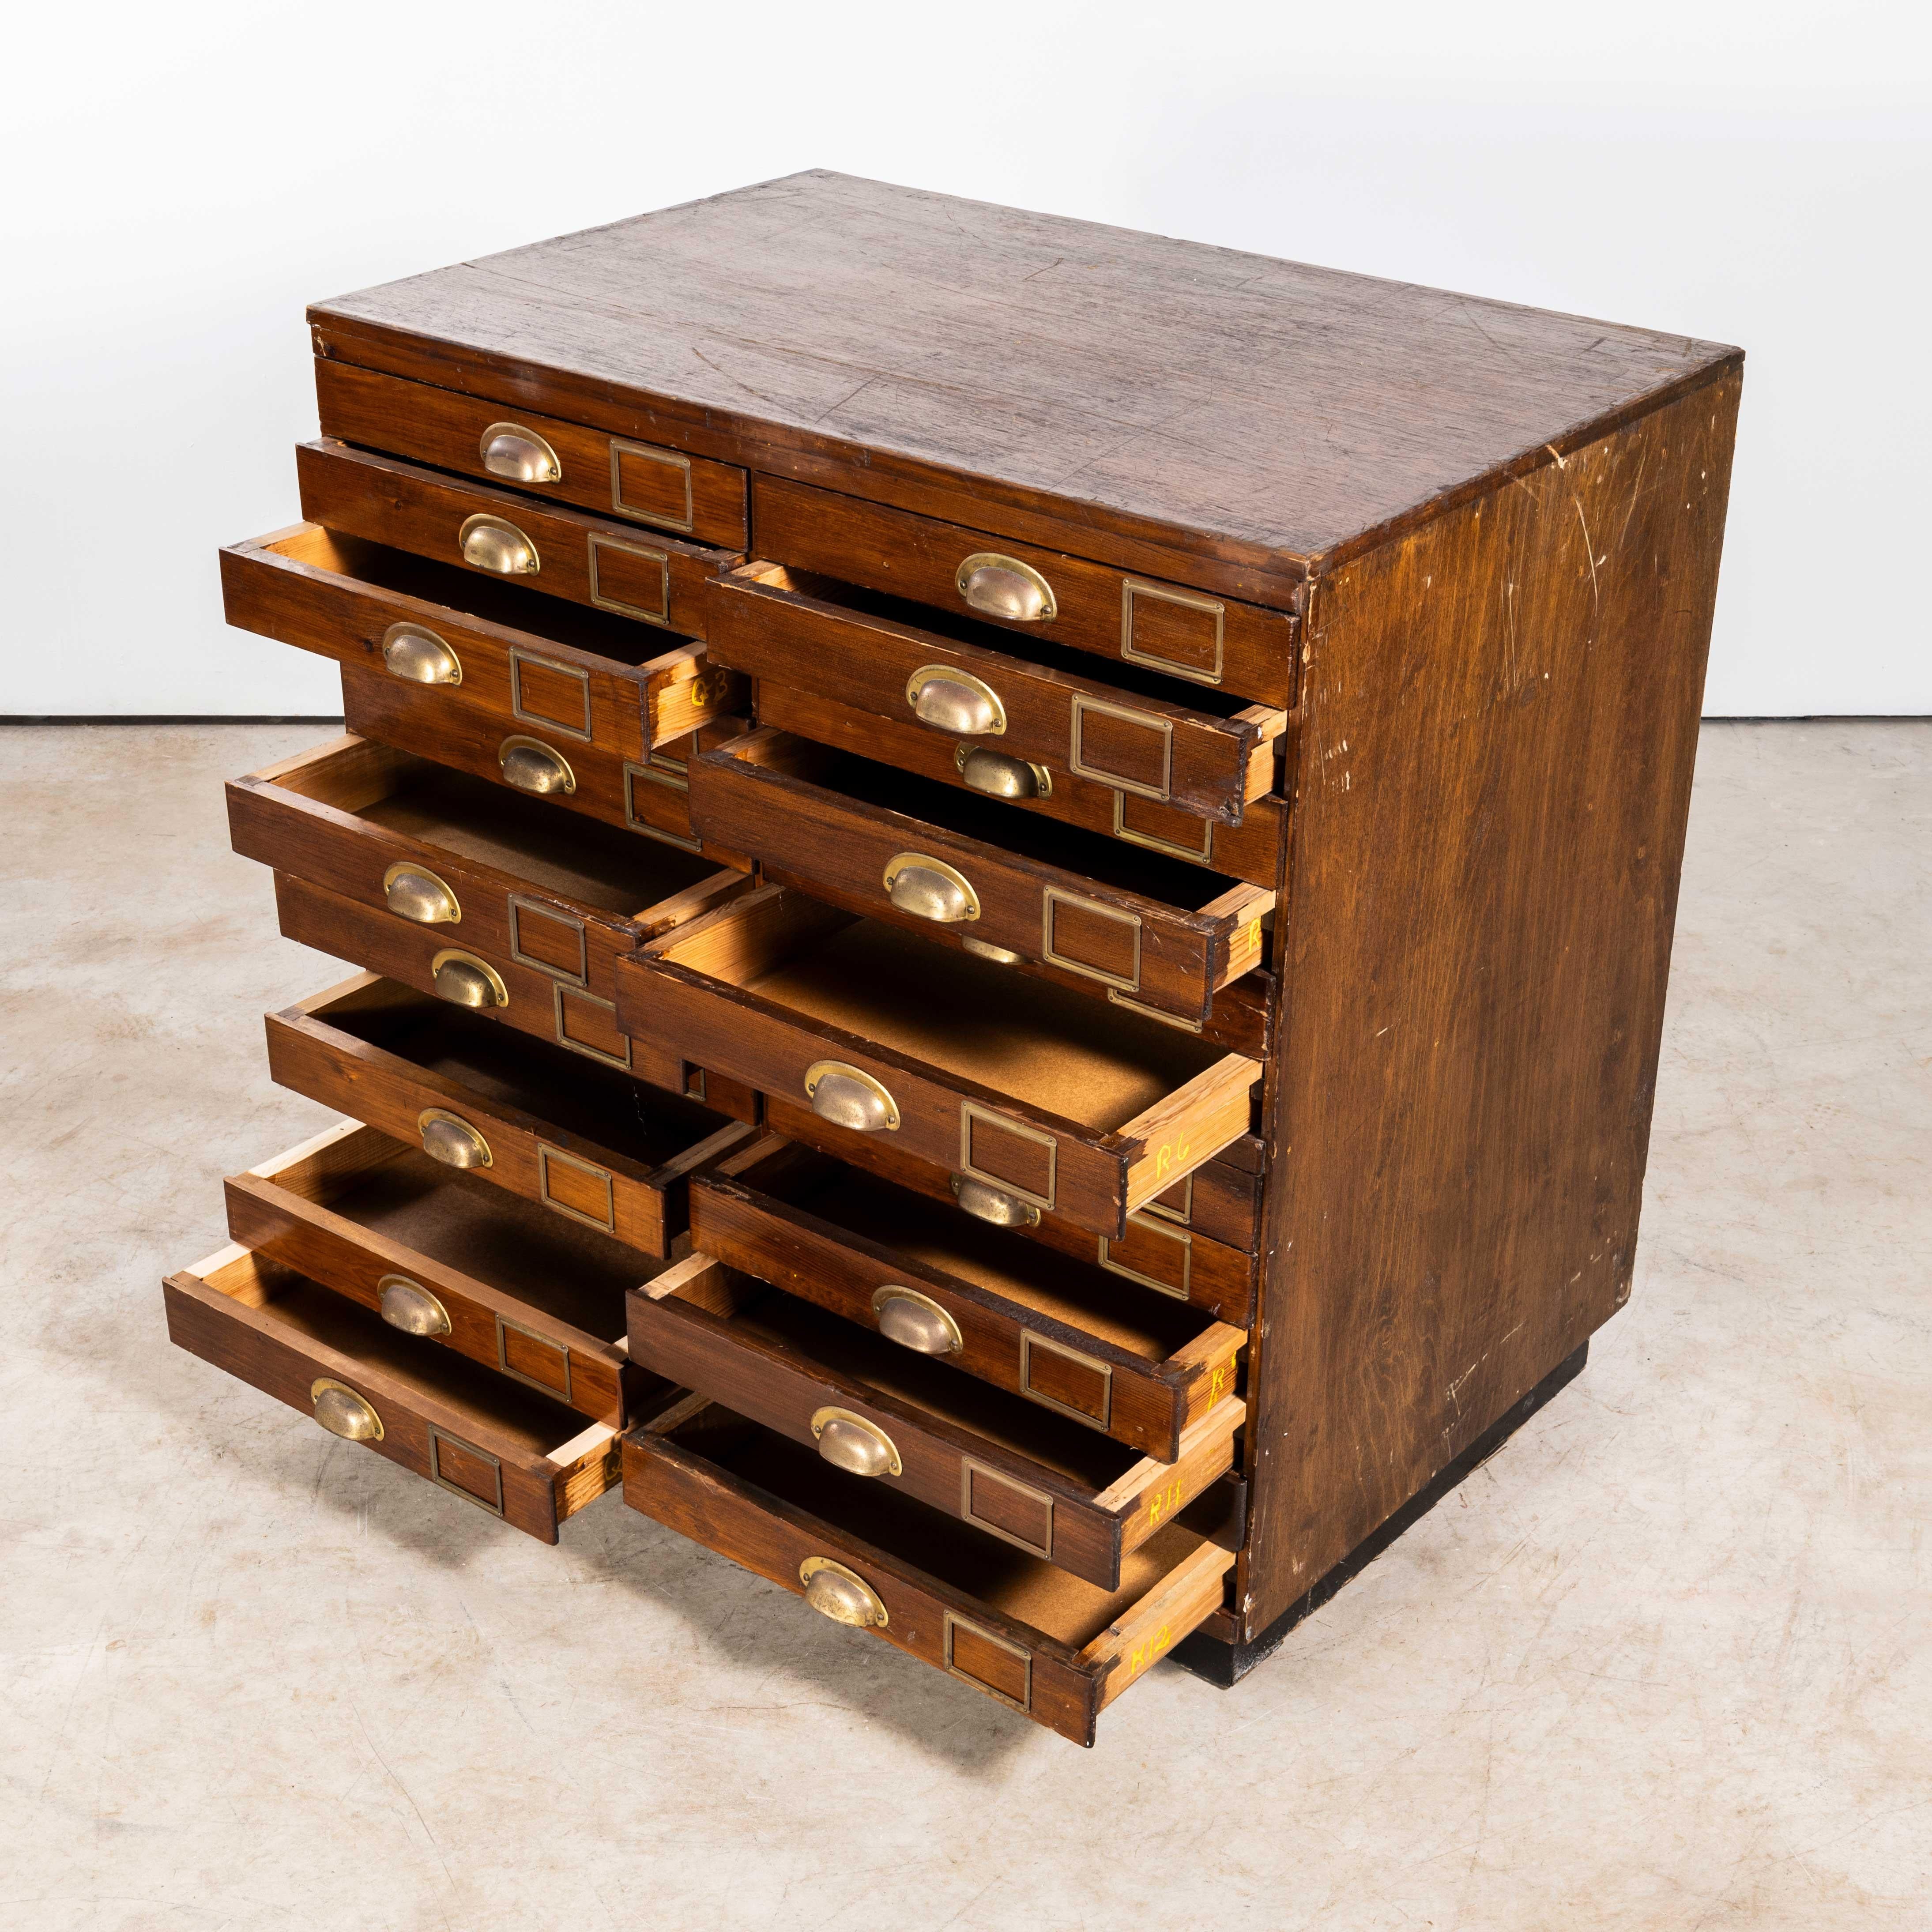 Mid-20th Century 1950's Engineers Drawer Units - Twenty Four Drawers (1226.4) For Sale